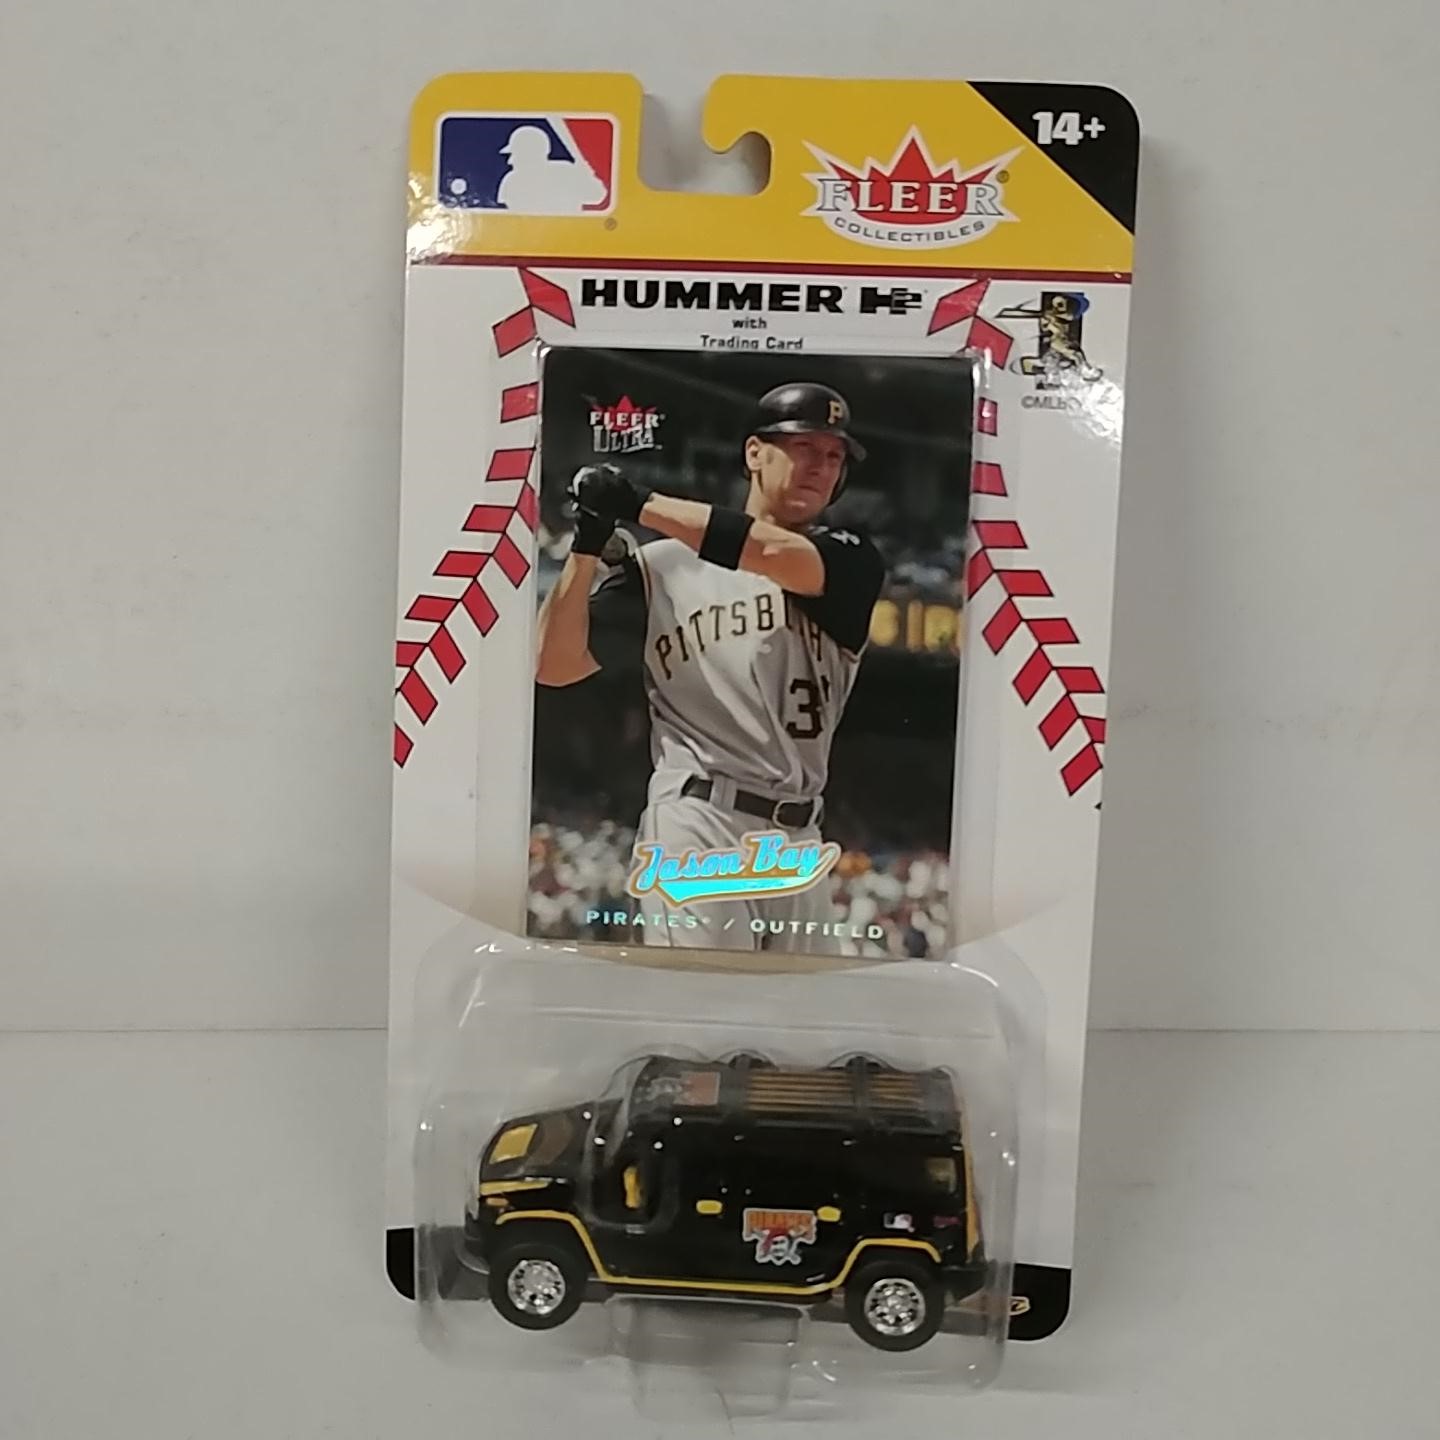 2005 Pittsburgh Pirates 1/64th Hummer with Jason Bay trading card